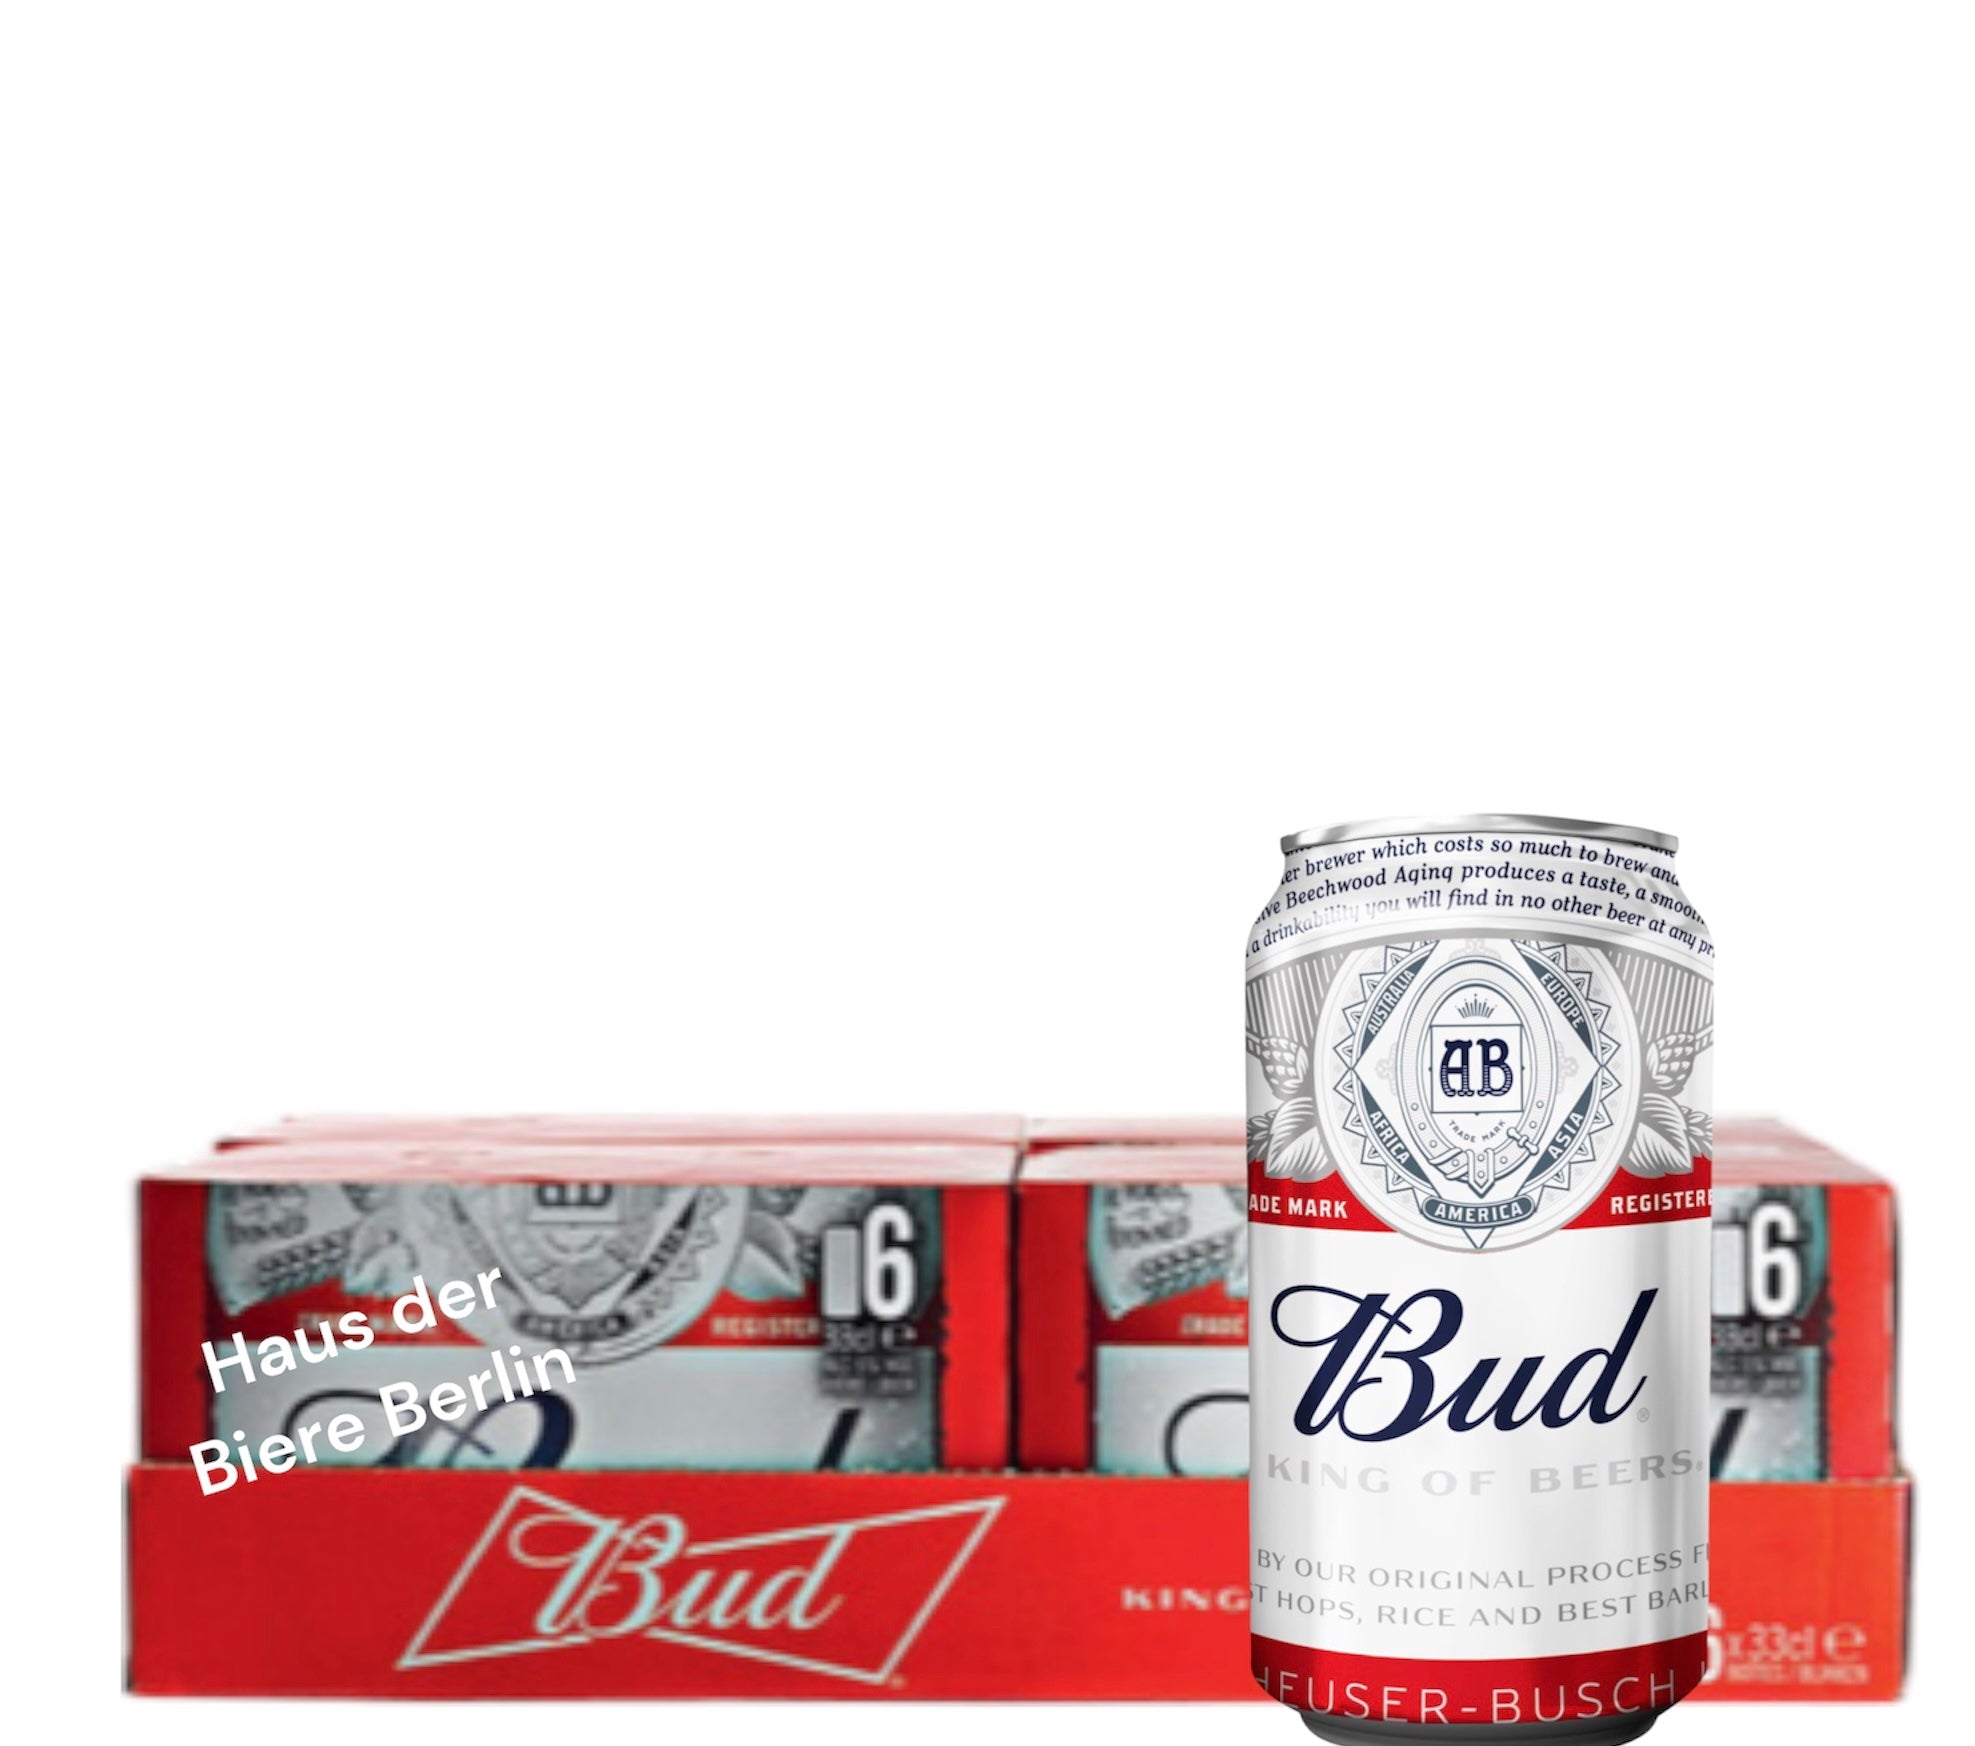 Bud Beer USA 0,33l- The King of Beer mit 5% Vol.